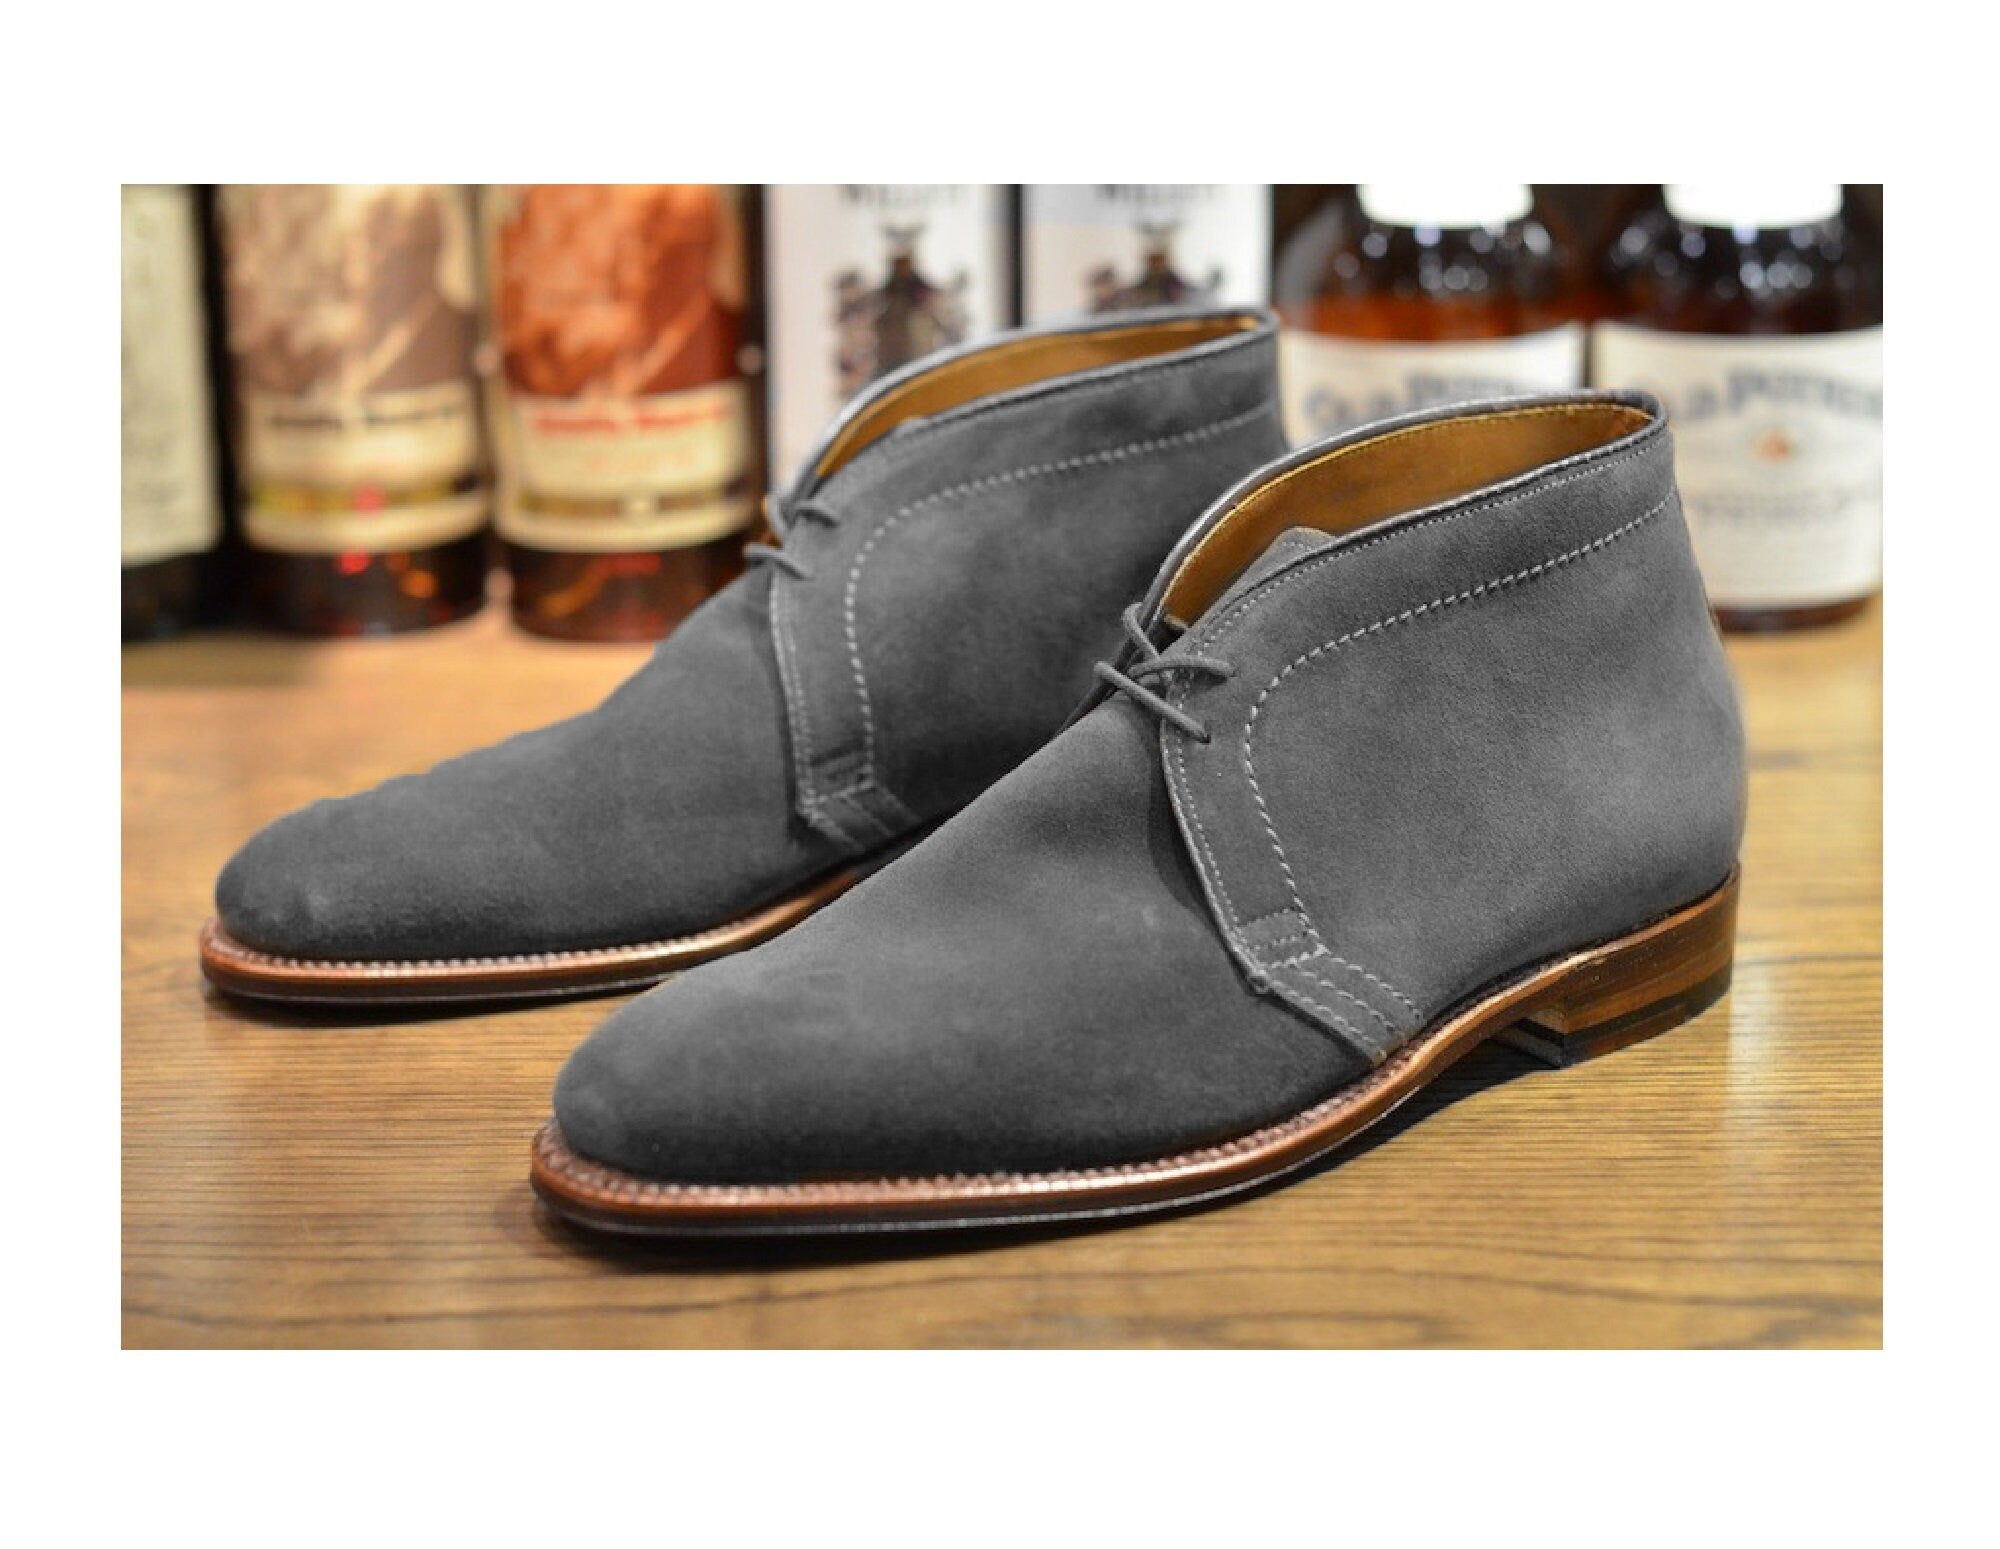 Men's Handmade Chukka suede Boot, Men's Gray Color Ankle High Lace Up Boots